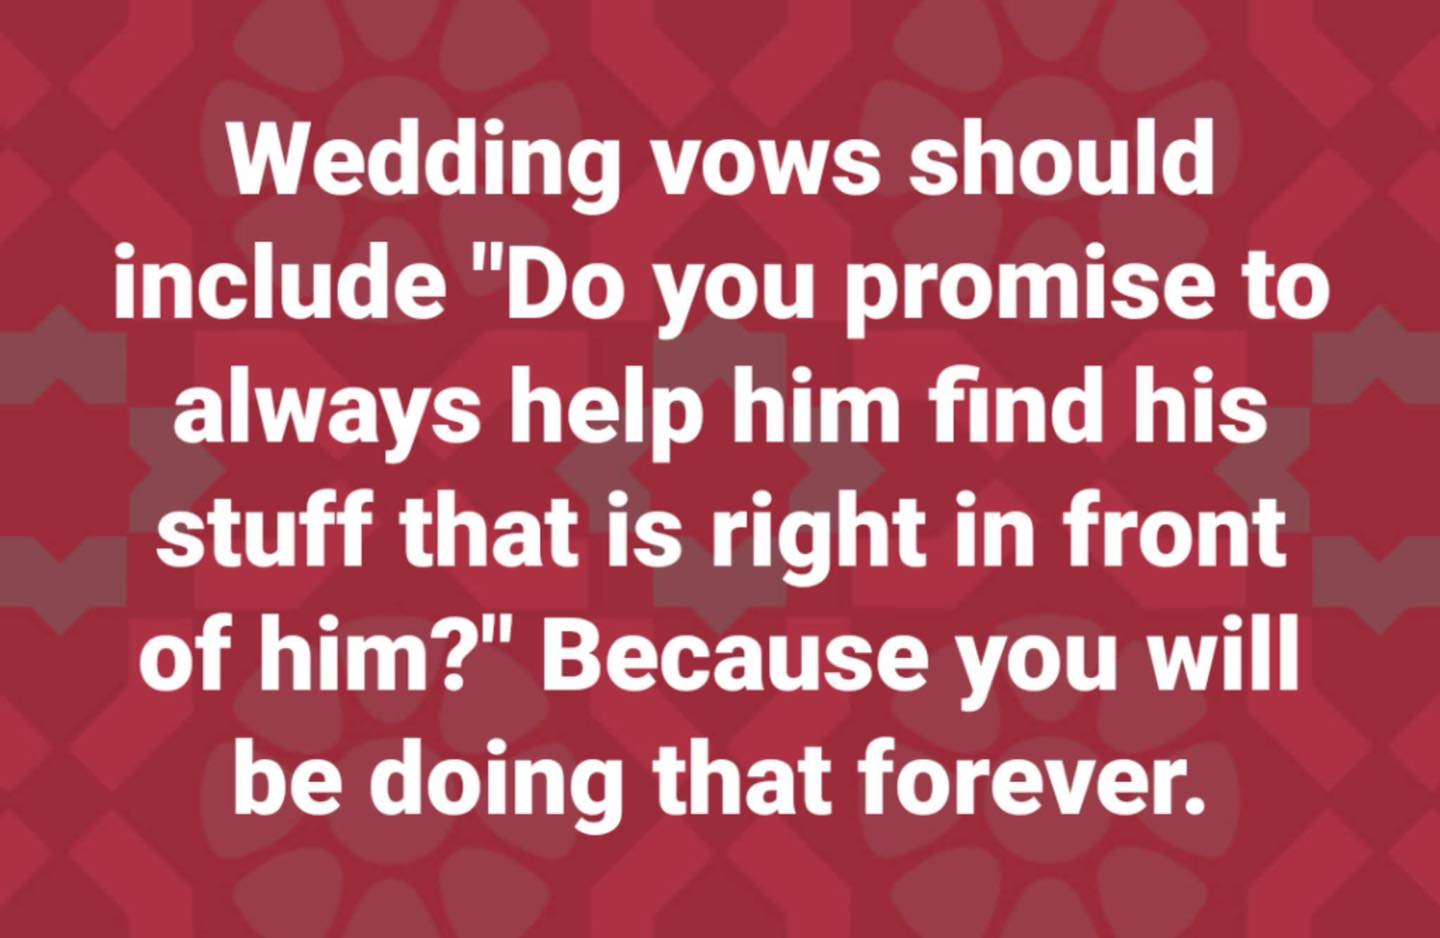 love - Wedding vows should include "Do you promise to always help him find his stuff that is right in front of him?" Because you will be doing that forever.